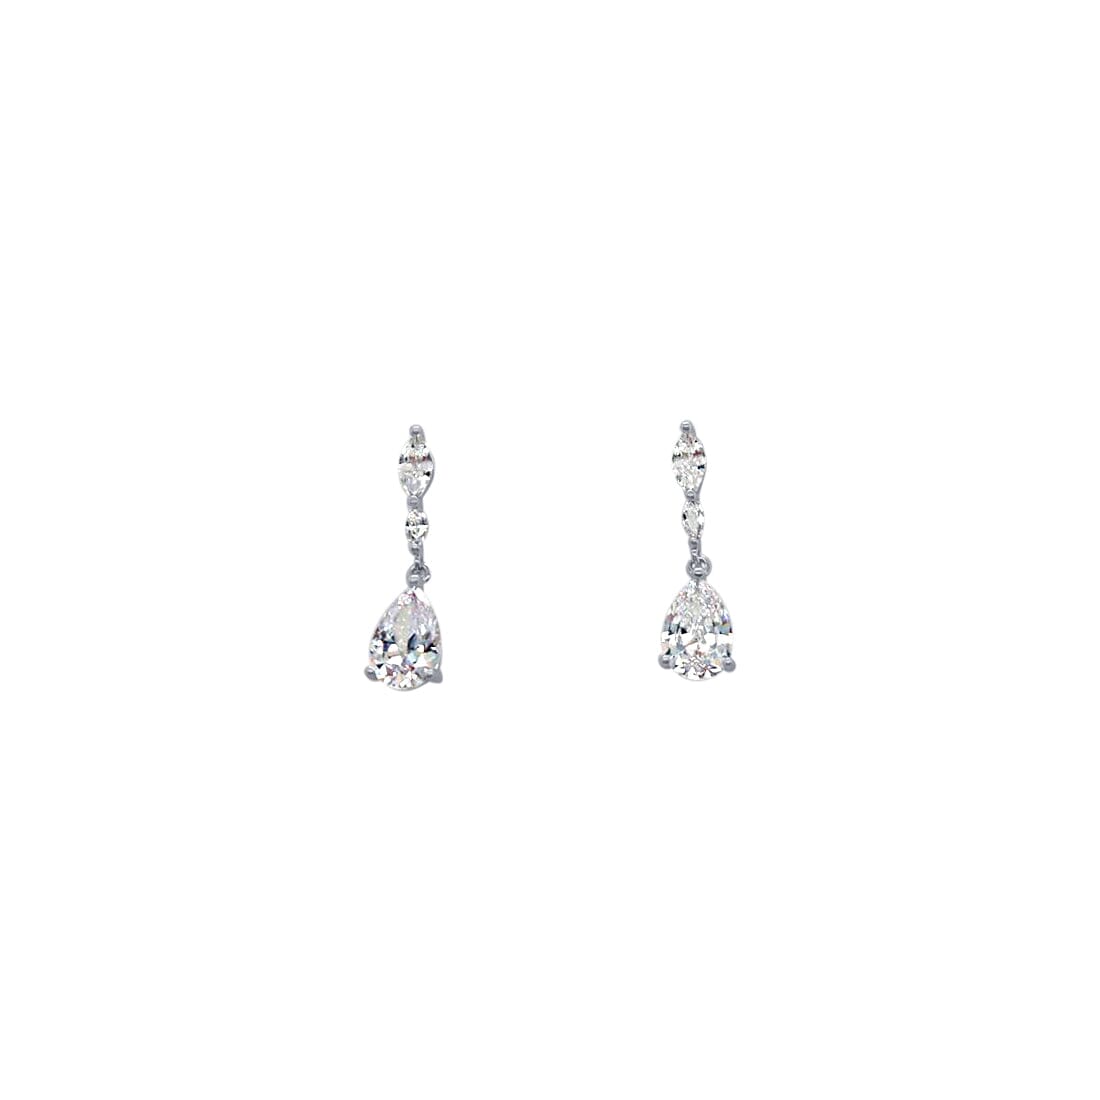 Pear and Marquise Drop Earrings with Cubic Zirconia in Sterling Silver Earrings Bevilles 